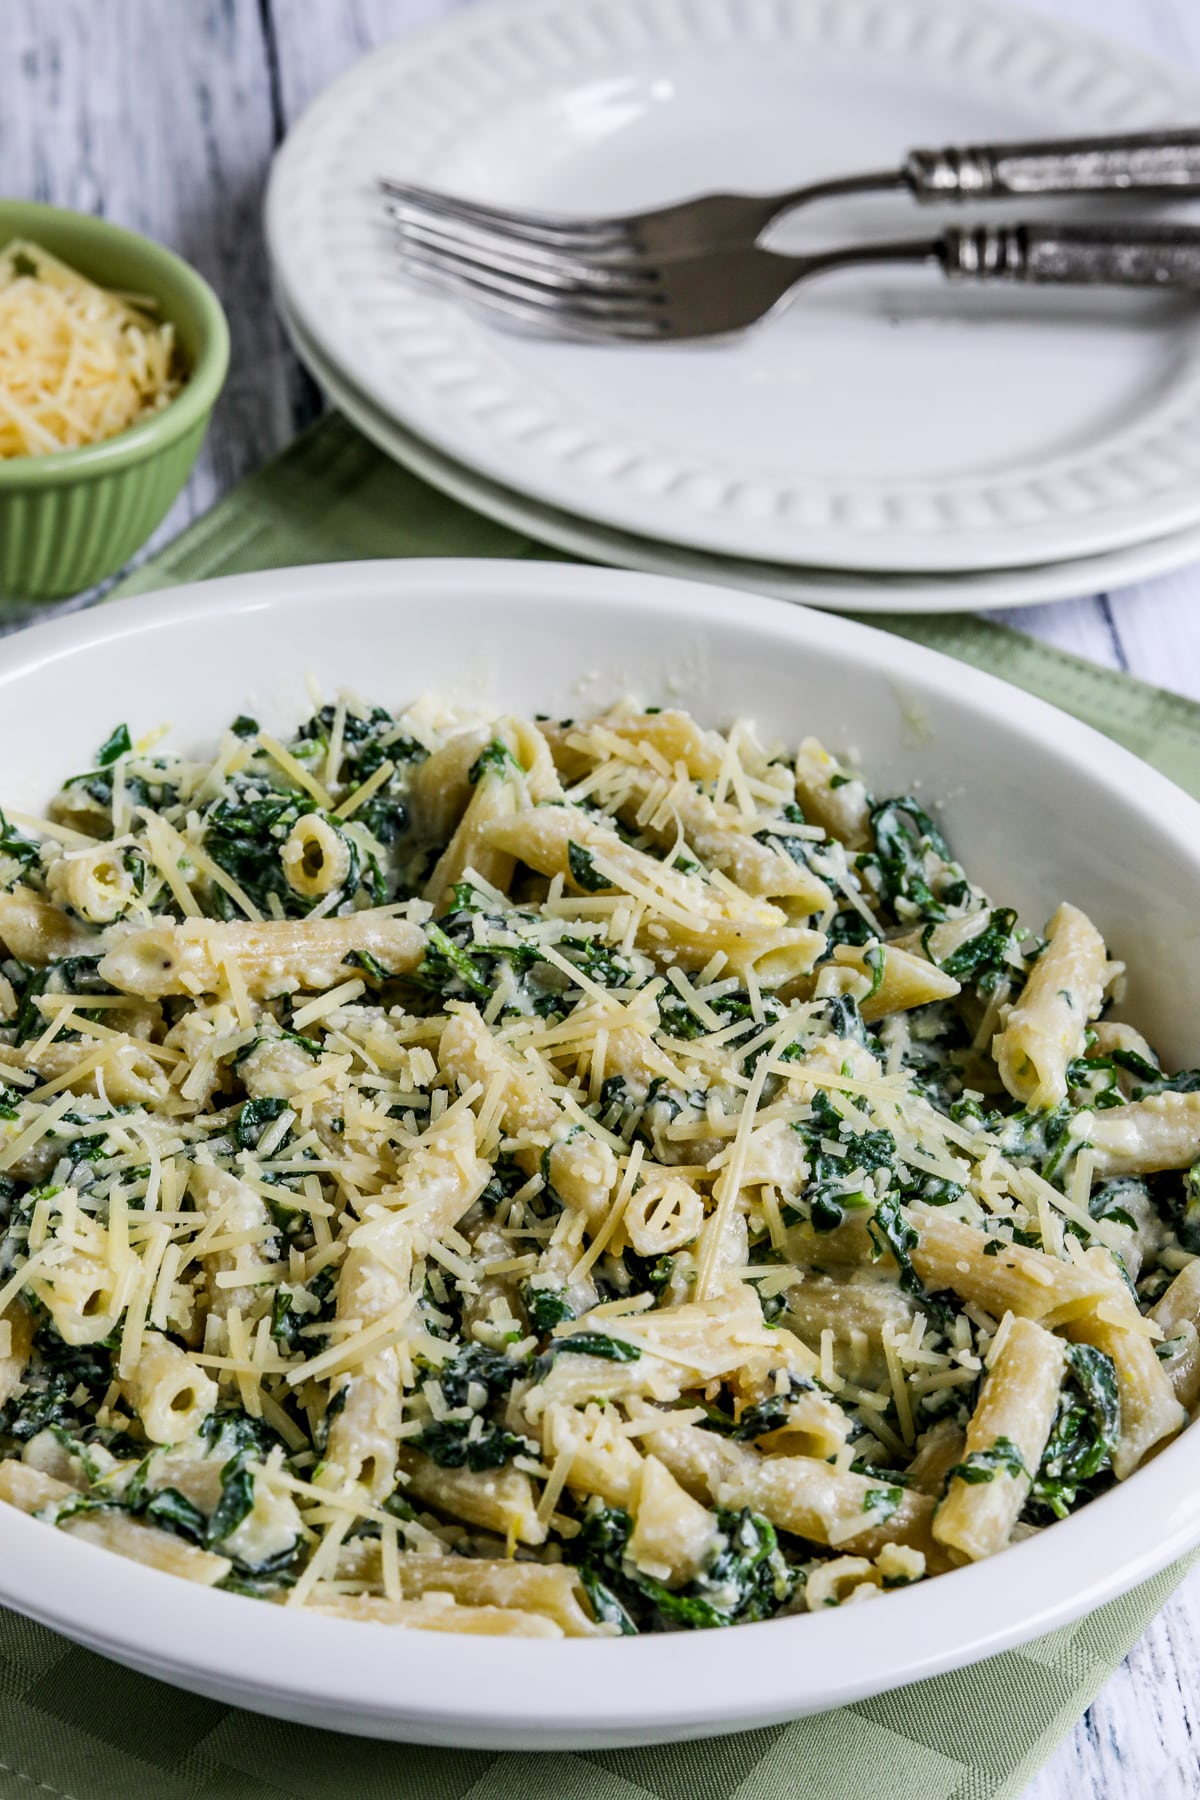 Pasta with Creamy Arugula Sauce shown in serving dish with Parmesan, plates, and forks in background